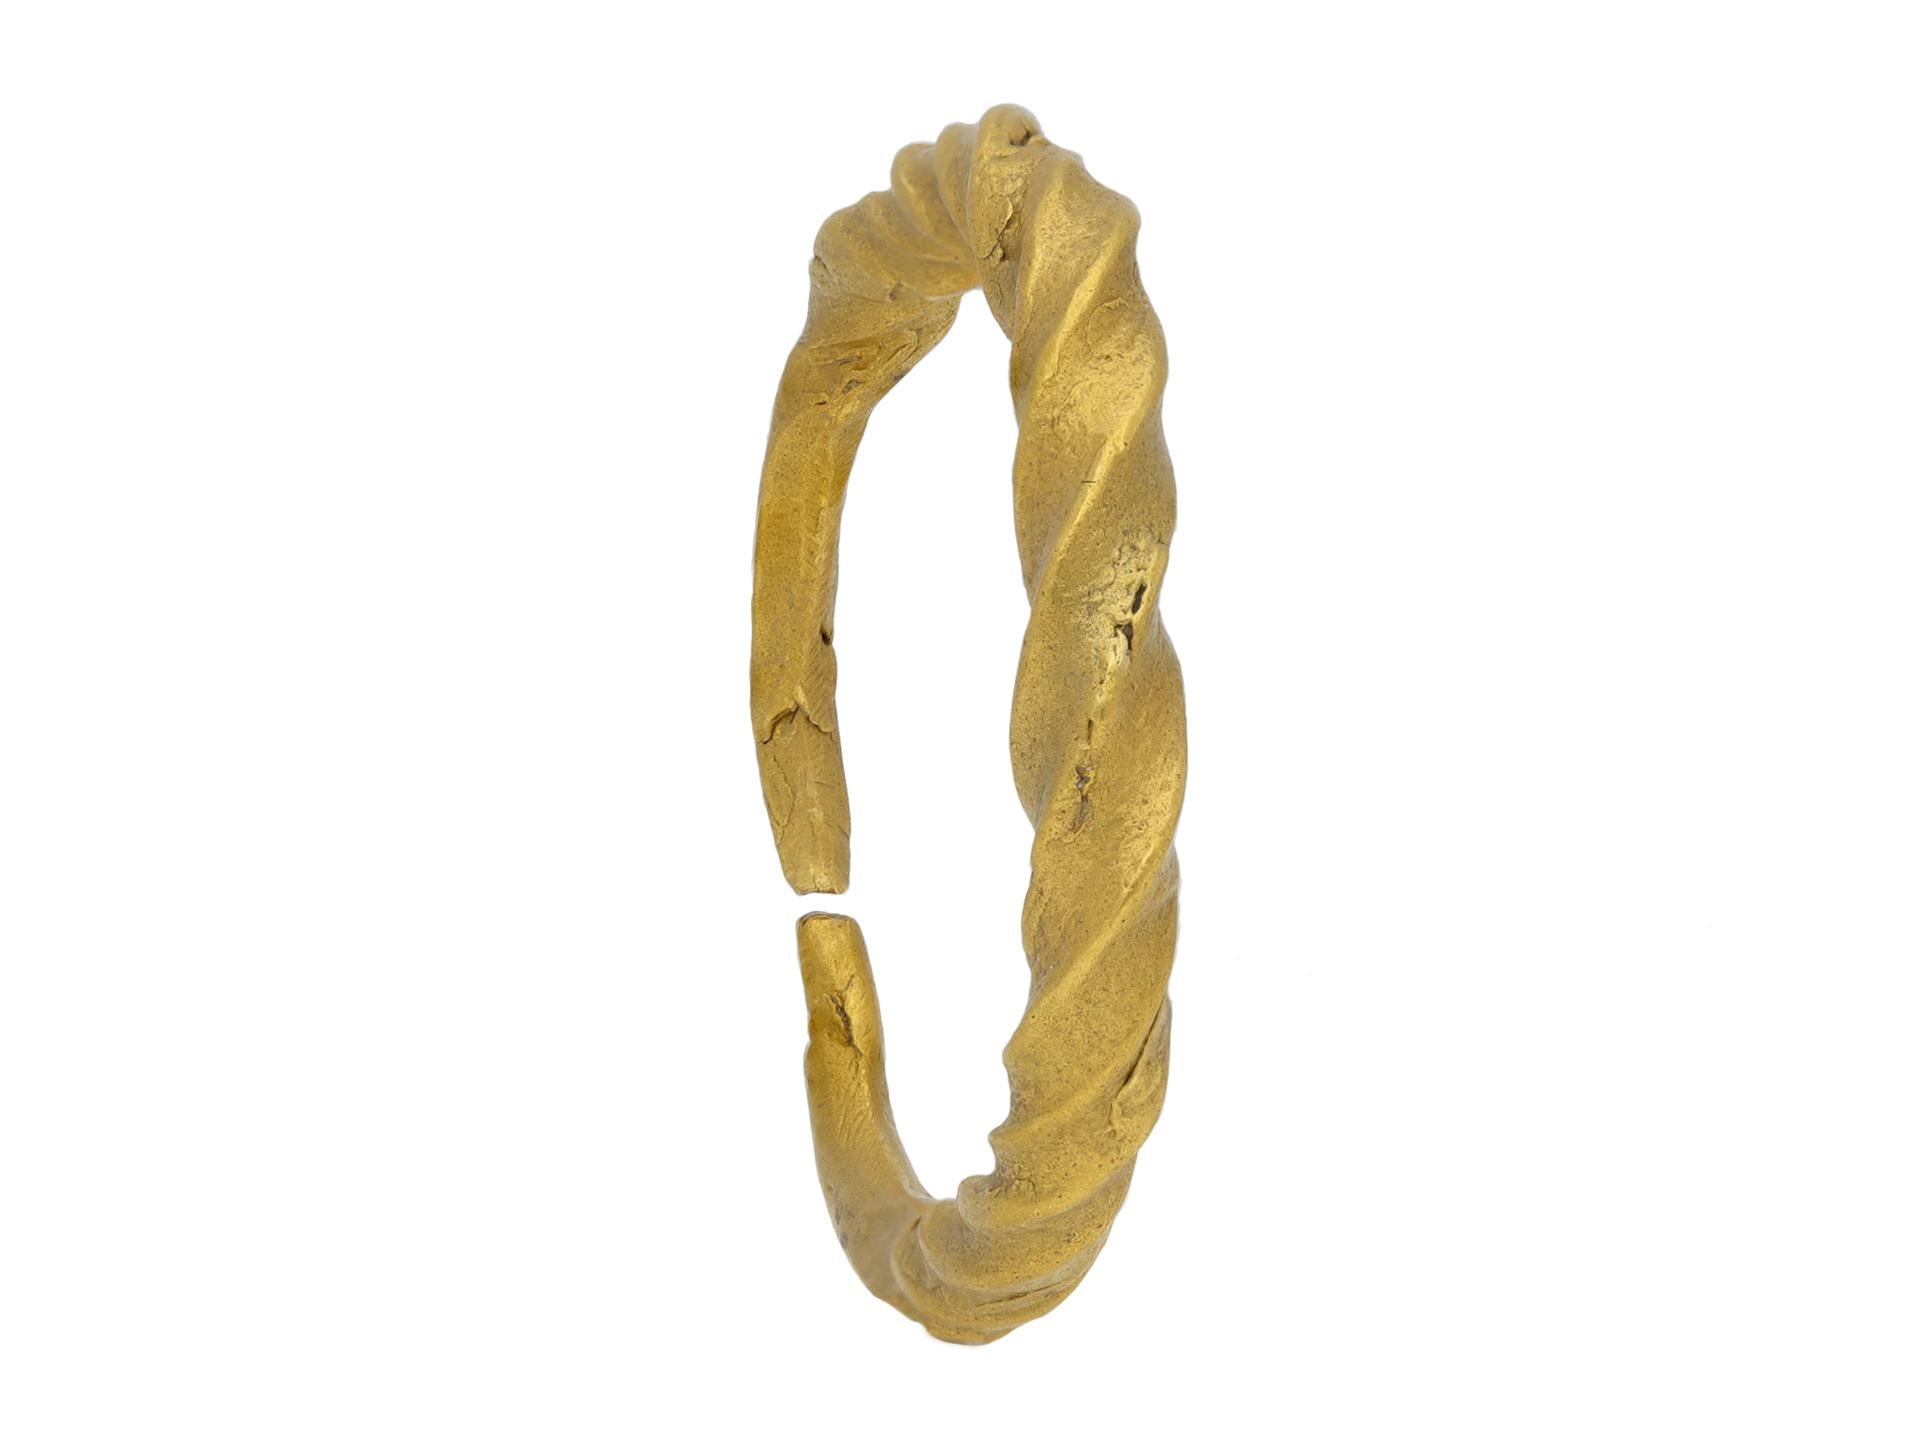 Viking gold penannular twisted ring. A yellow gold ring formed of a single twisted gold rod, graduating from center, the ends of the rod drawn out to a solid tapering rounded open closure at reverse. Tested yellow gold, approximately 7.75 grams in